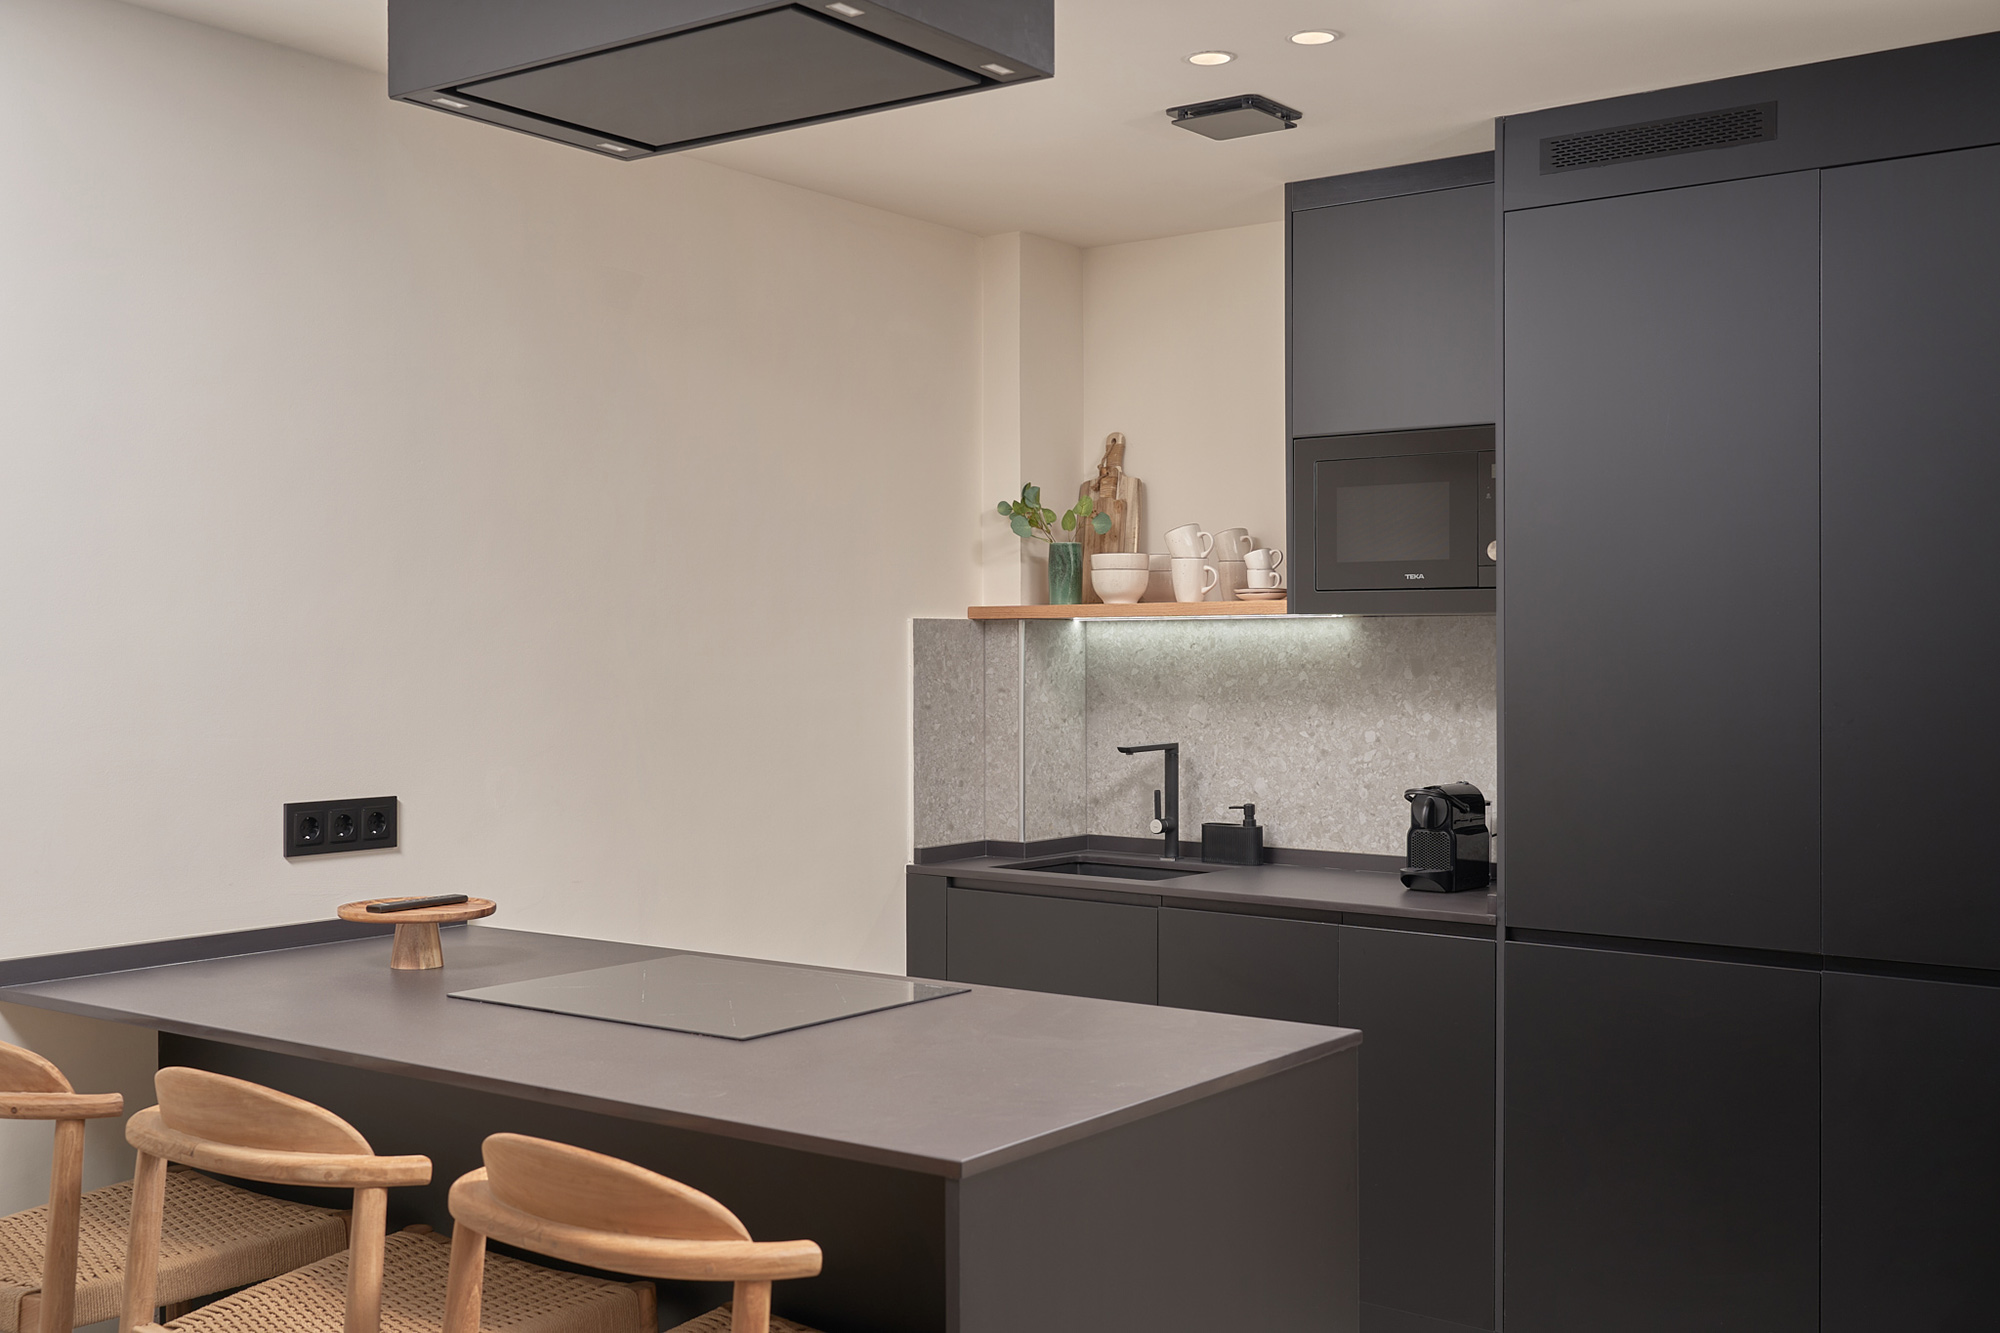 Image of Marina Guanarteme 15 in Dekton Sirius adds a welcoming touch to the kitchens of a residential development in Dubai - Cosentino